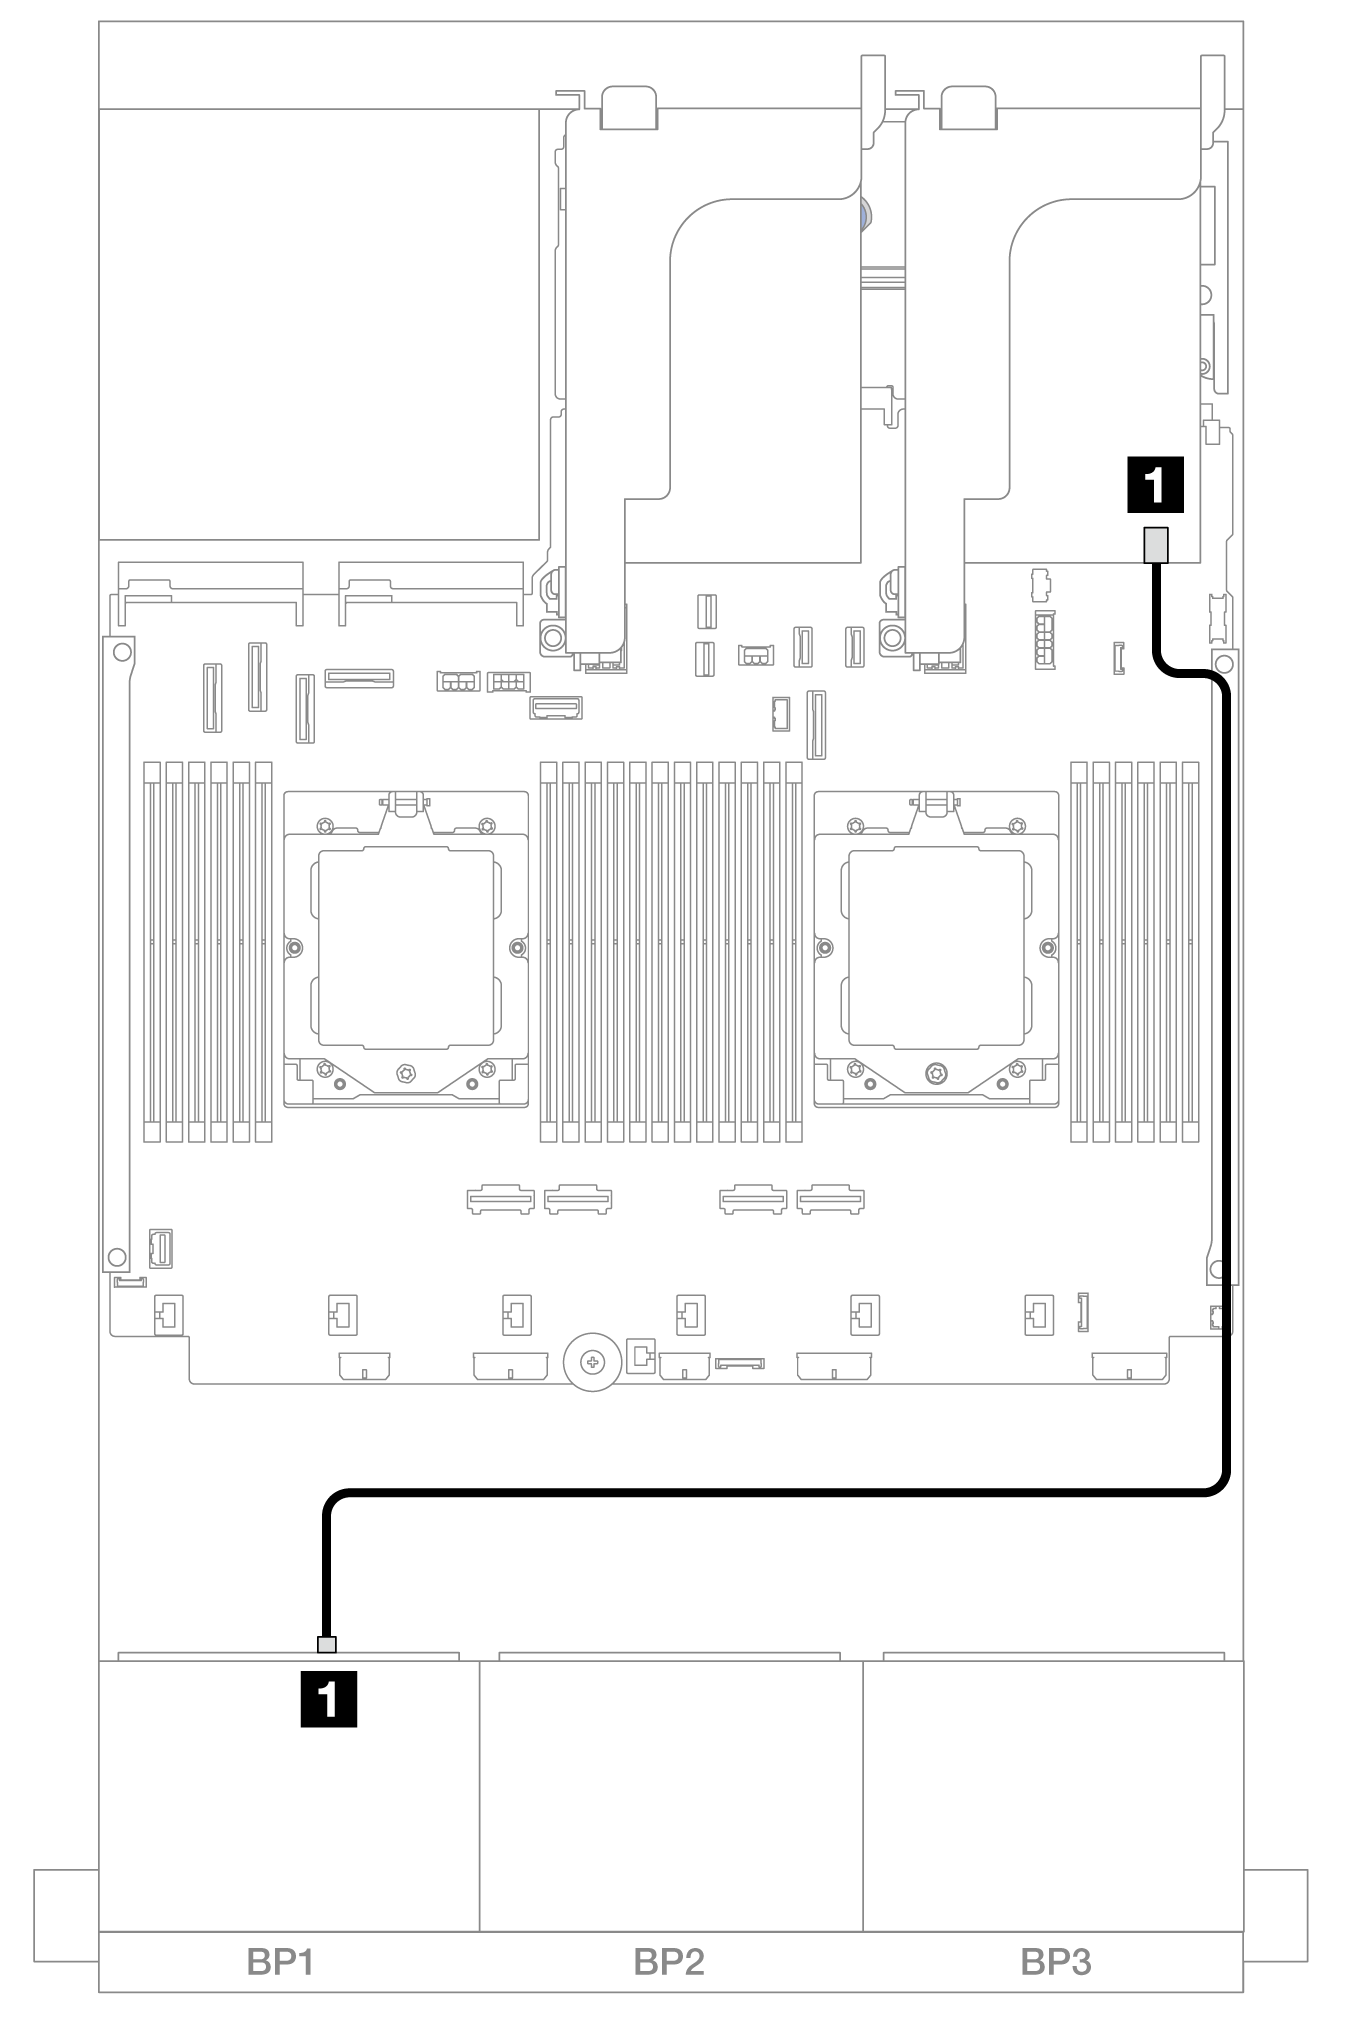 SAS/SATA cable routing to 8i adapter